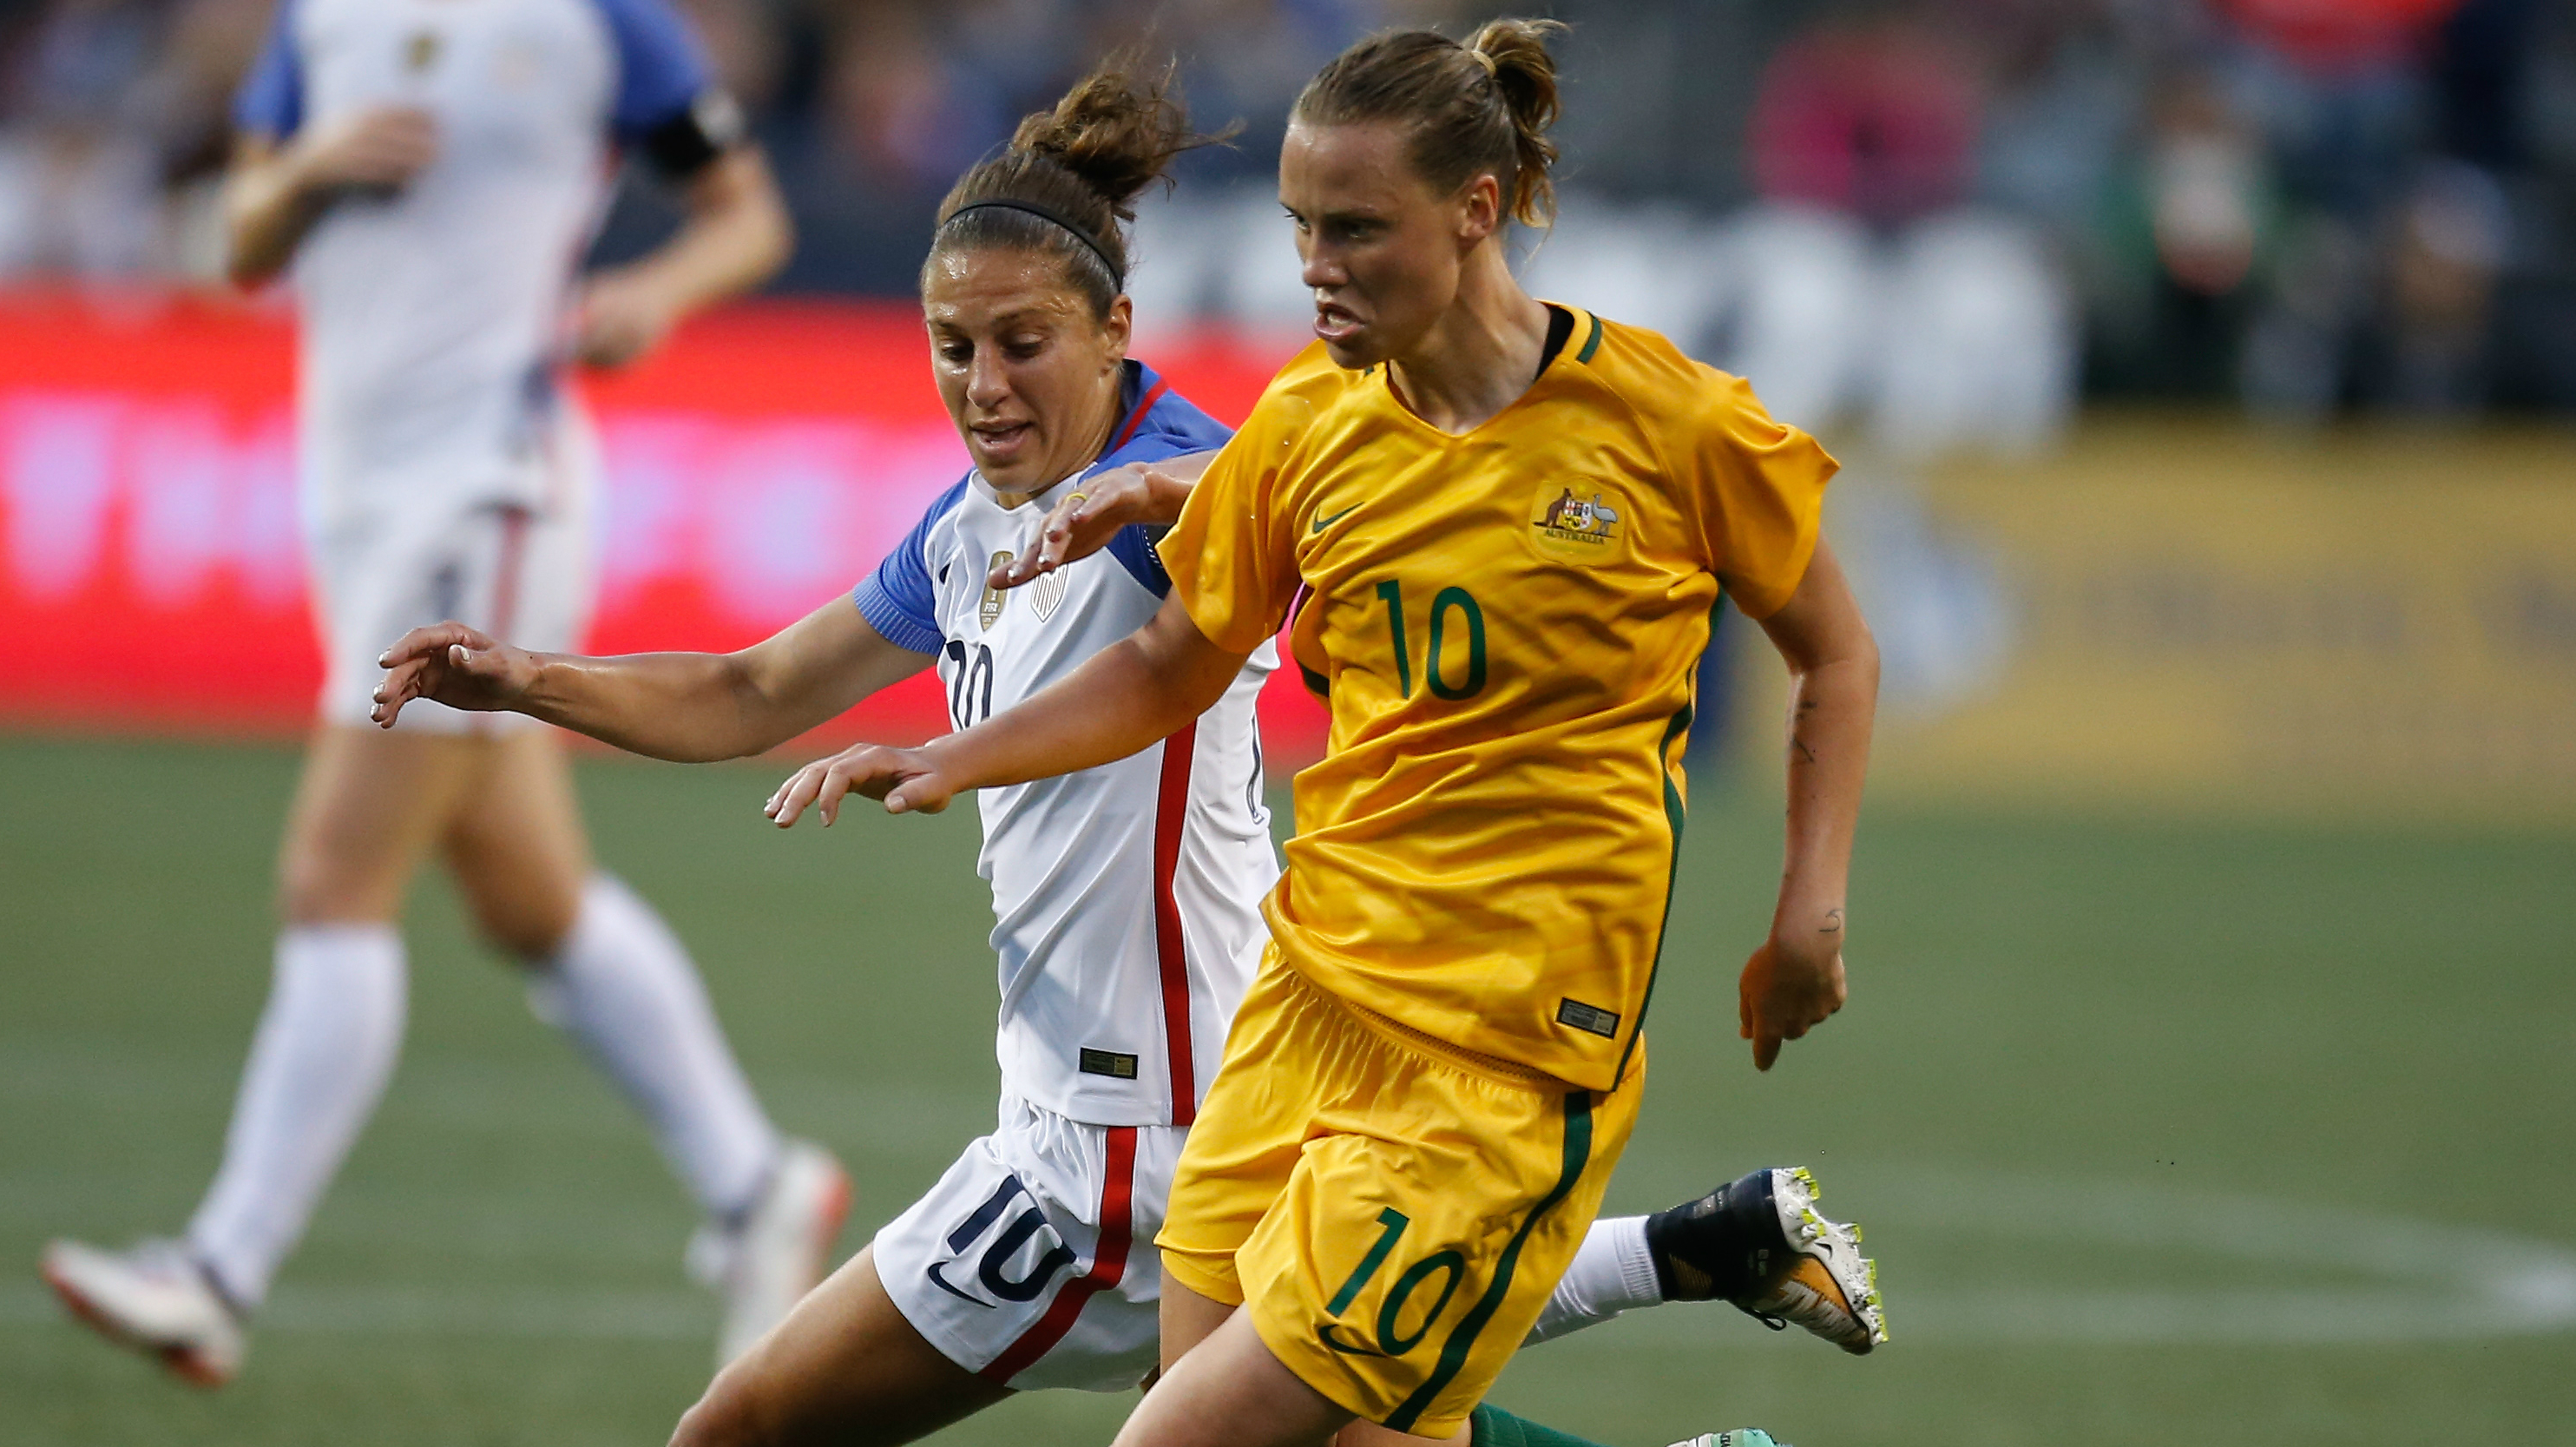 Westfield Matildas star Emily van Egmond in action against the USA during the Tournament of Nations.